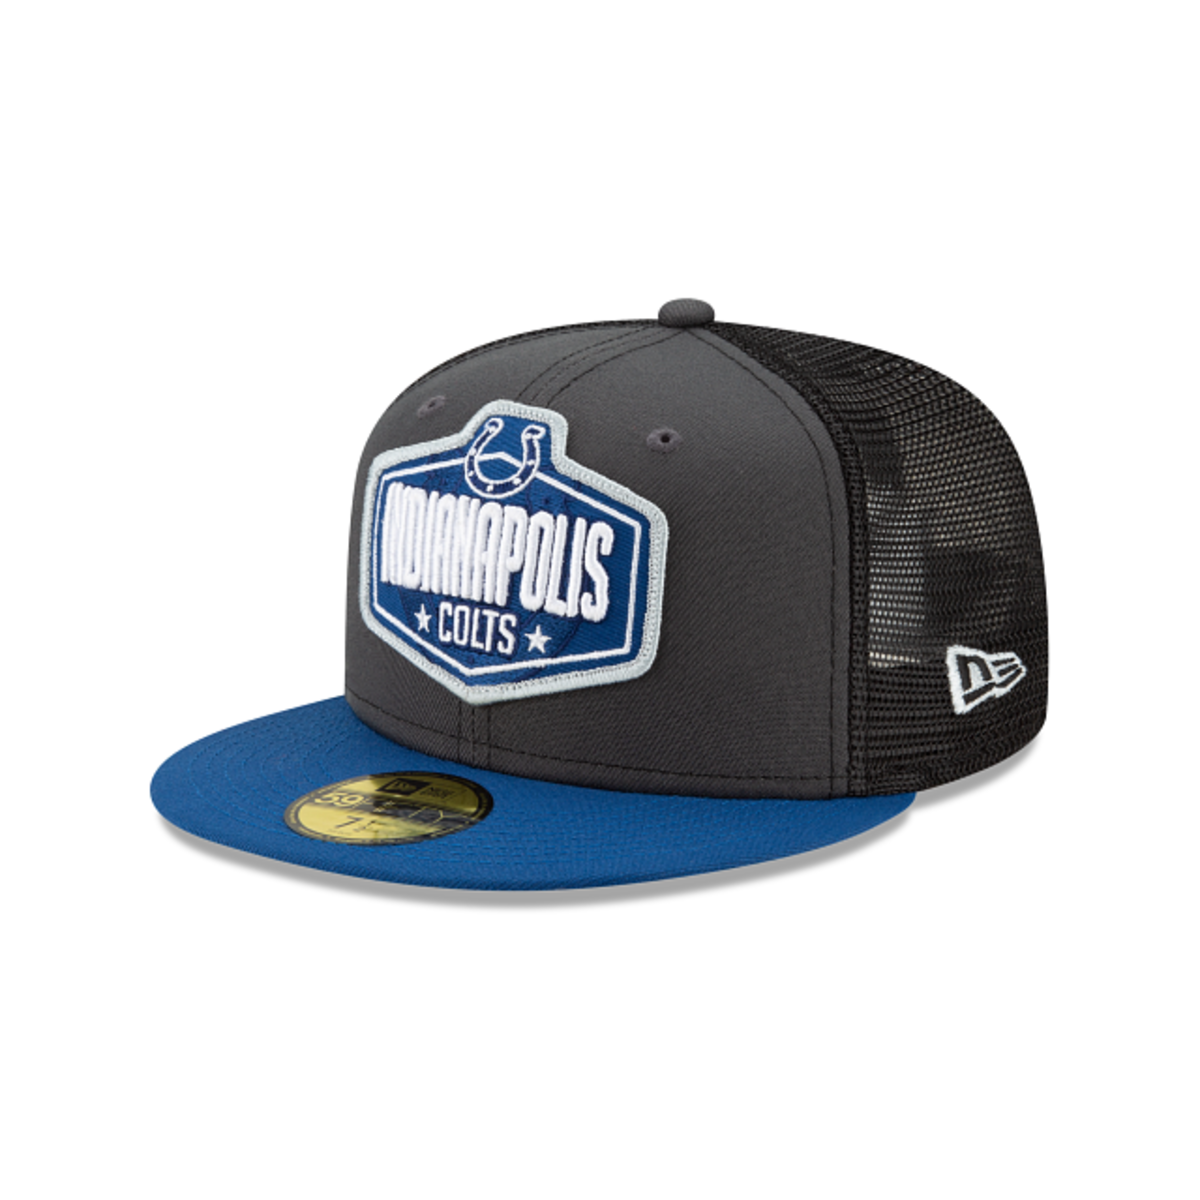 Official Indianapolis Colts 2021 NFL Draft Hats are Here! Sports